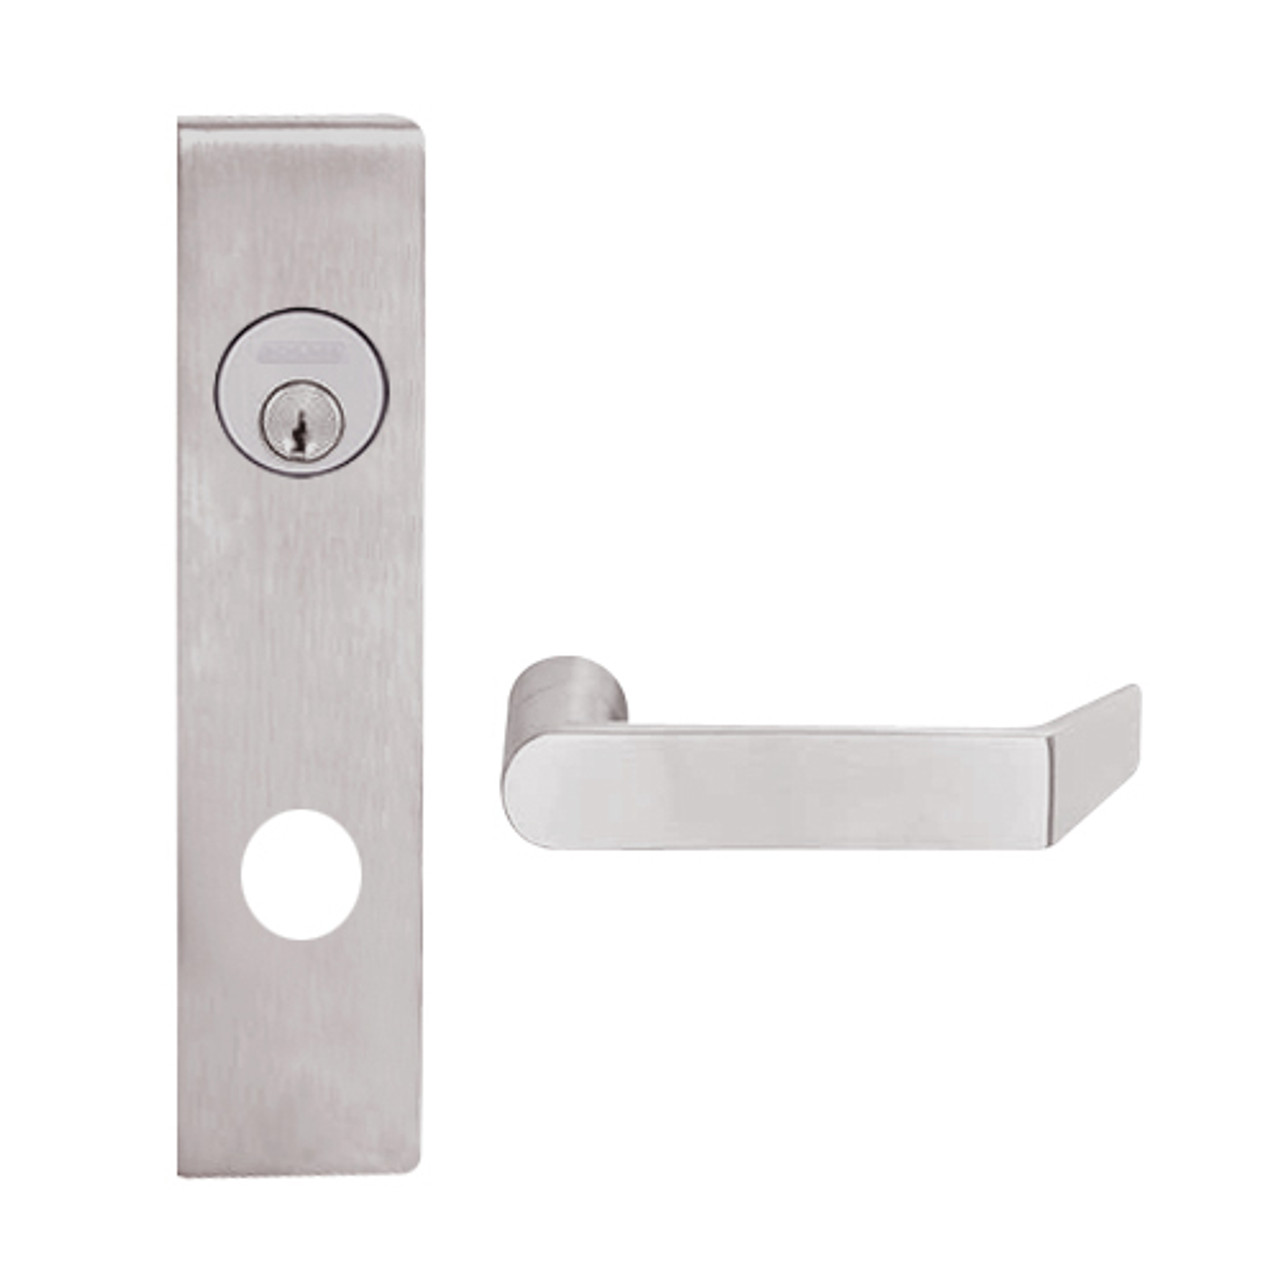 L9050L-06L-630 Schlage L Series Less Cylinder Entrance Commercial Mortise Lock with 06 Cast Lever Design in Satin Stainless Steel